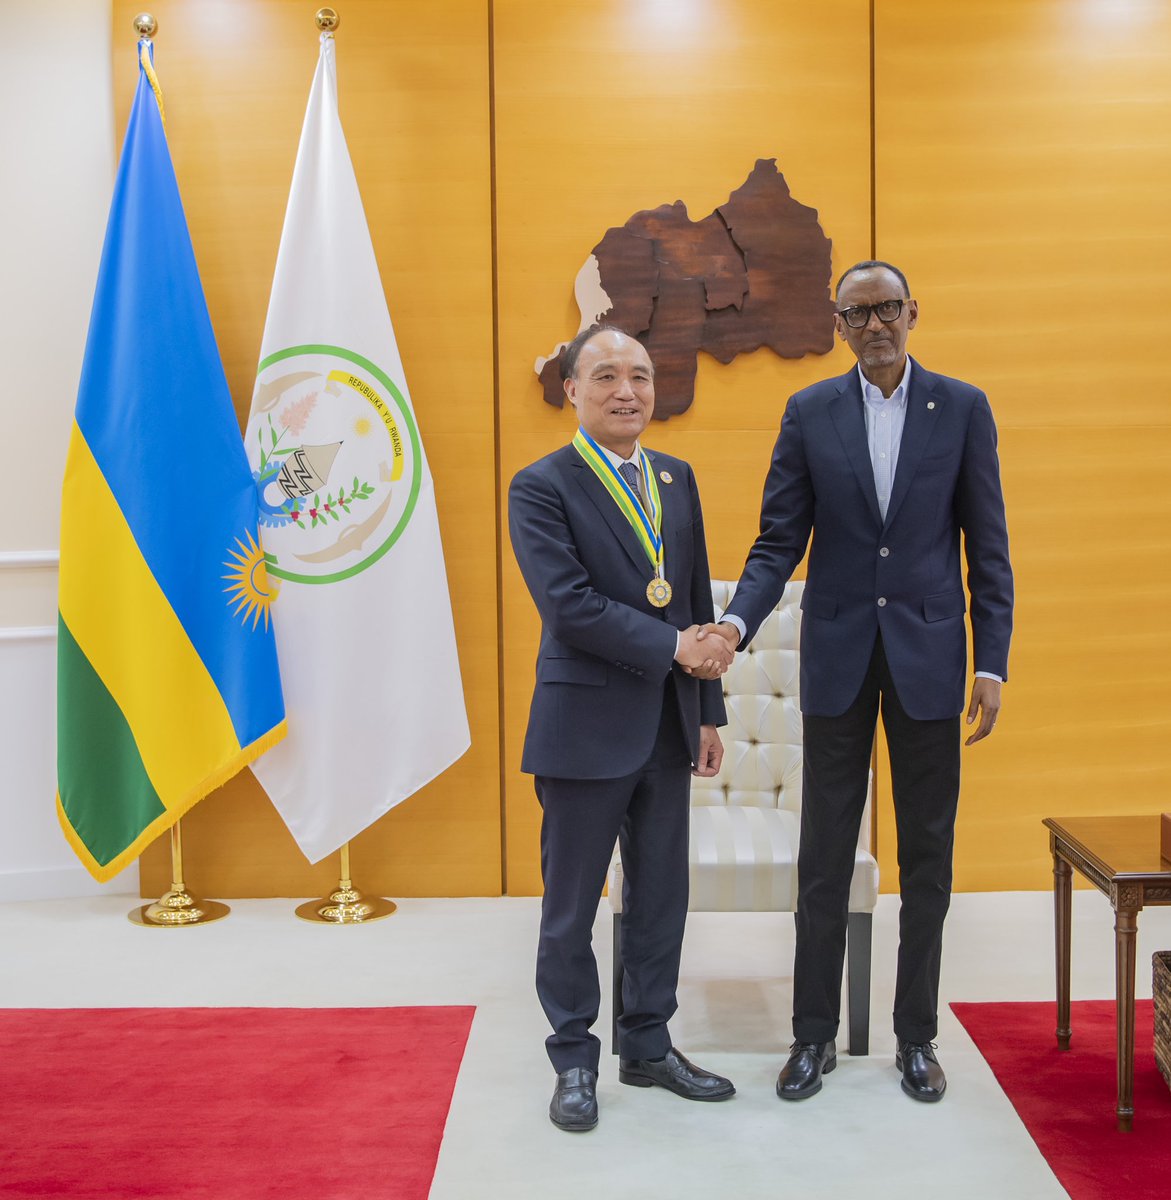 Humbled to receive from Rwandan President @PaulKagame the National Order of Honour, Agaciro, for my service as @ITUSecGen during a very consequential period for global ICT developments